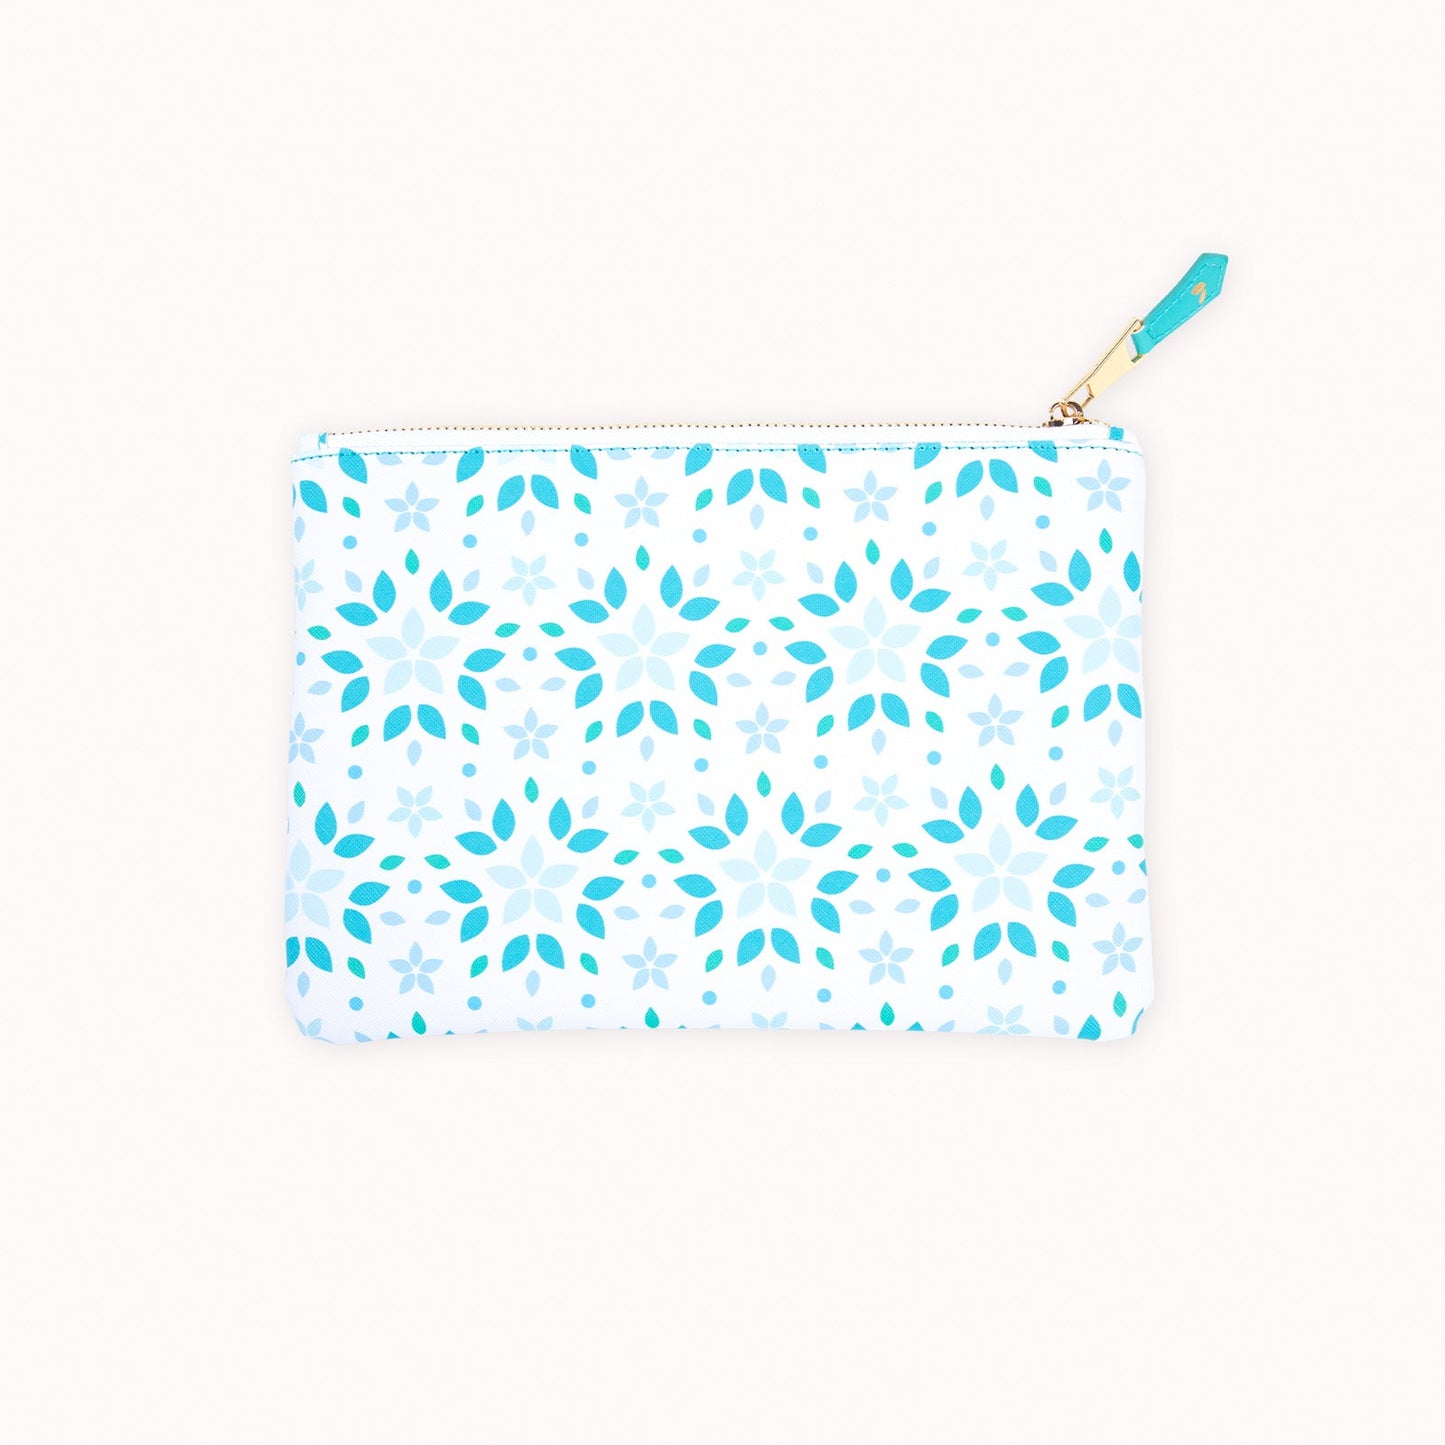 Accessory Pouch - Zipper pouch - Goal Setting - Cultivate What Matters - Teal Tile